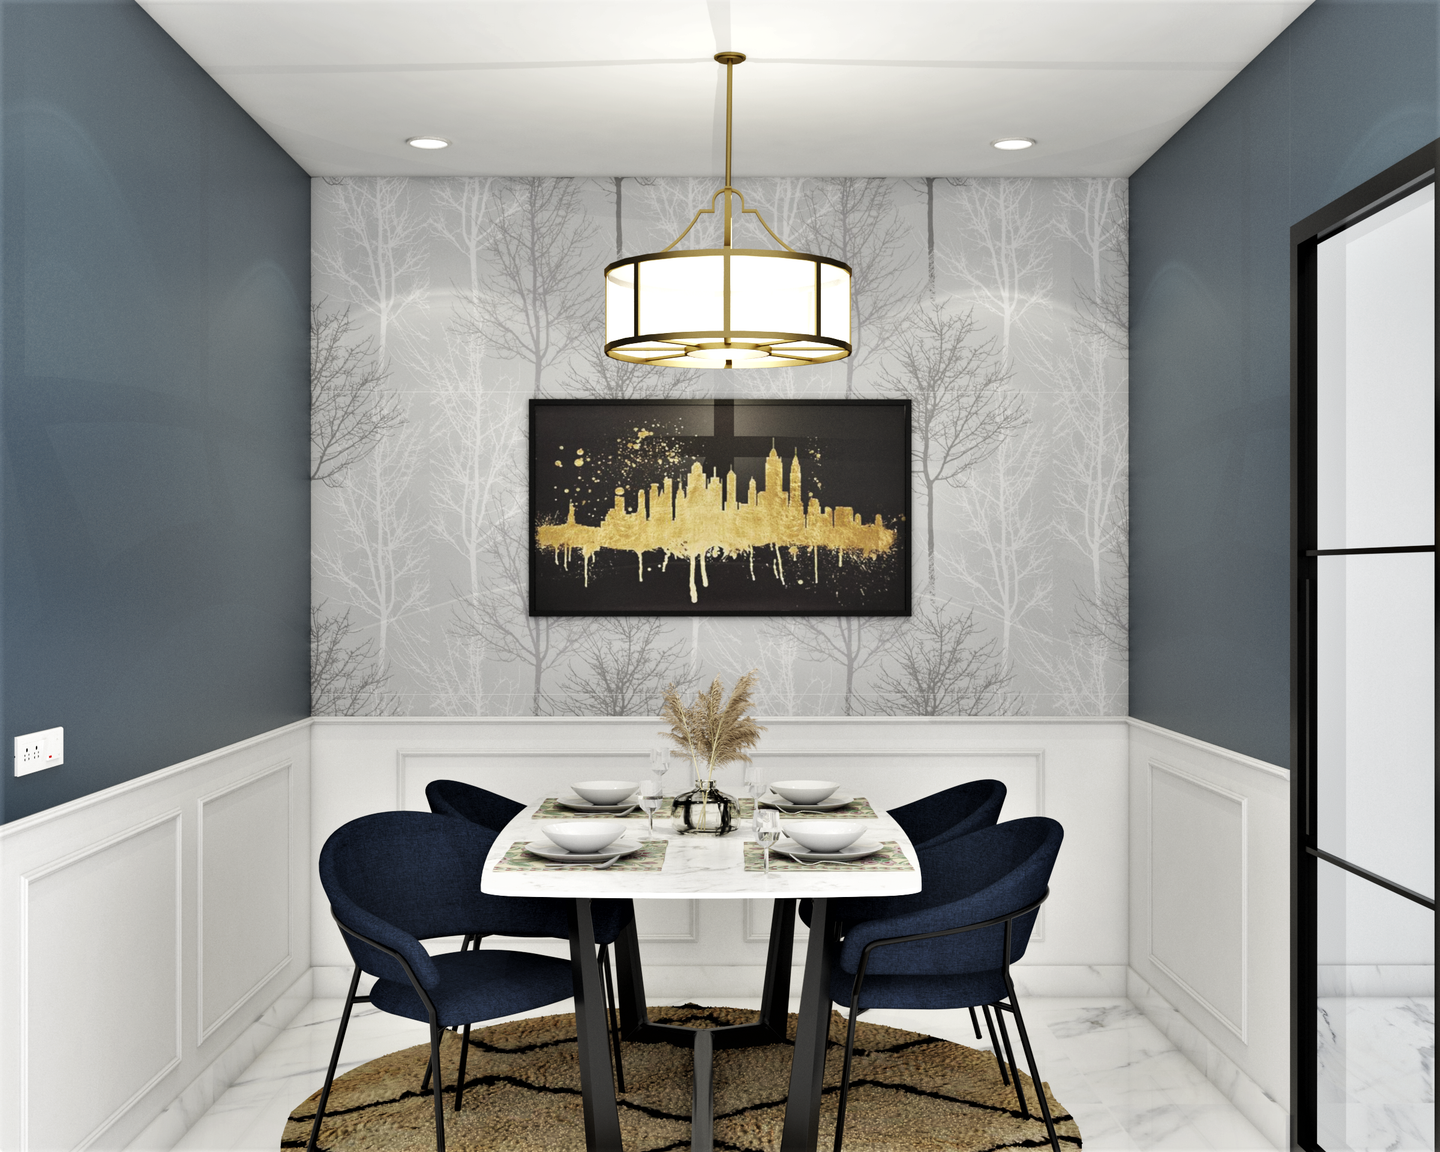 Compact 4-Seater Dining Room Design Idea with Abstract Wallpaper - Livspace